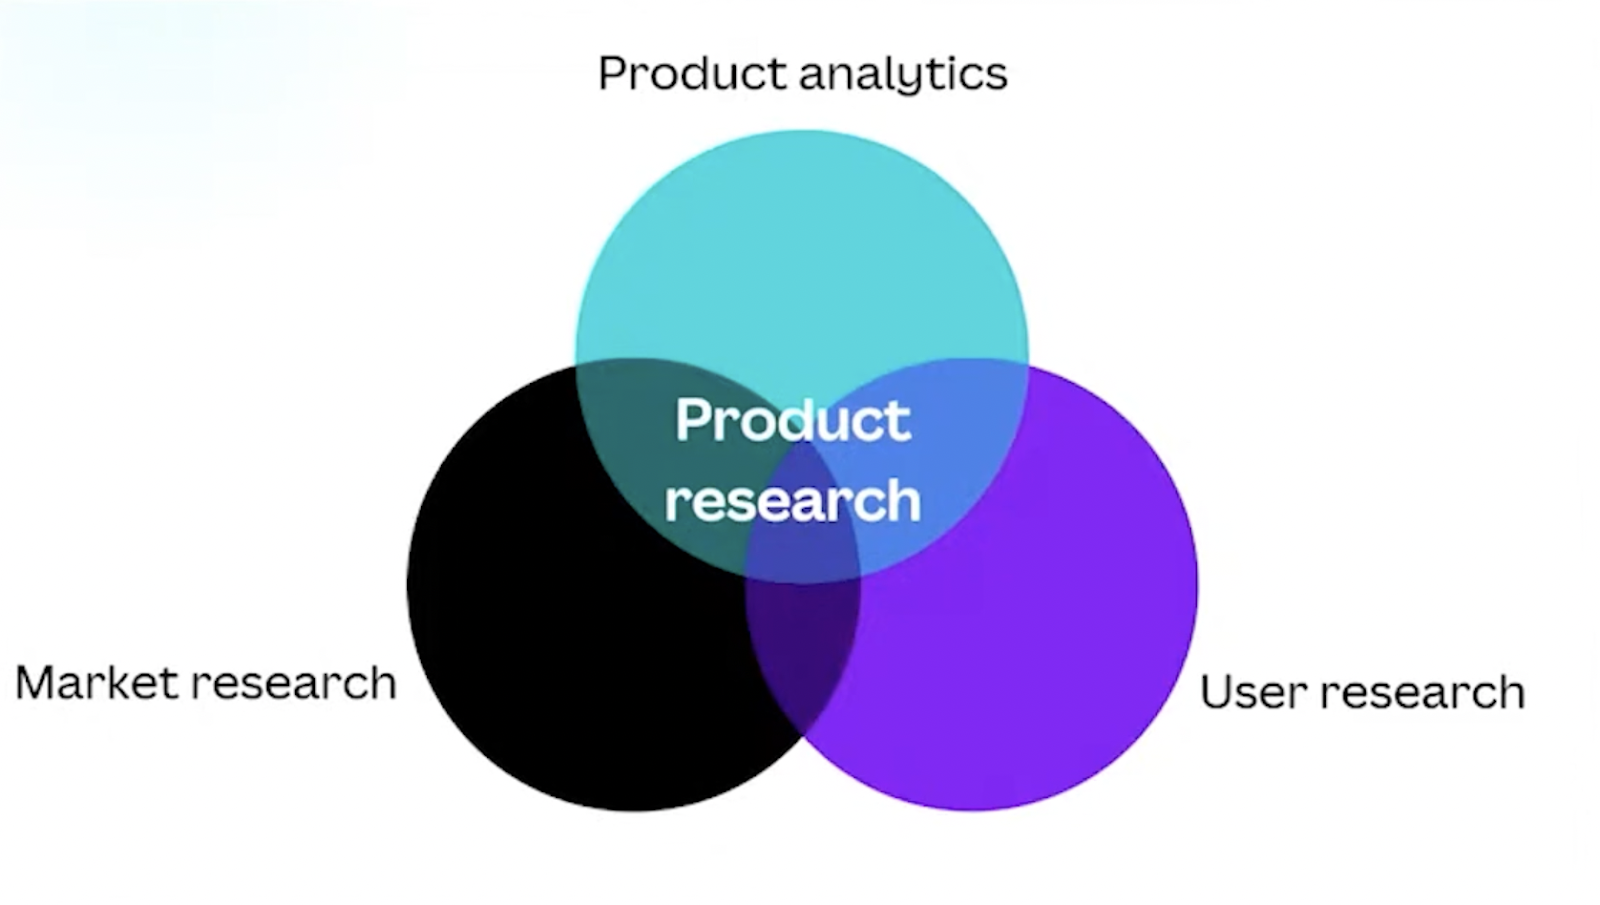 A venn diagram with three circles - in the middle where they all meet is "product research" and the three circles consist of "user research", "market research", and "product analytics".